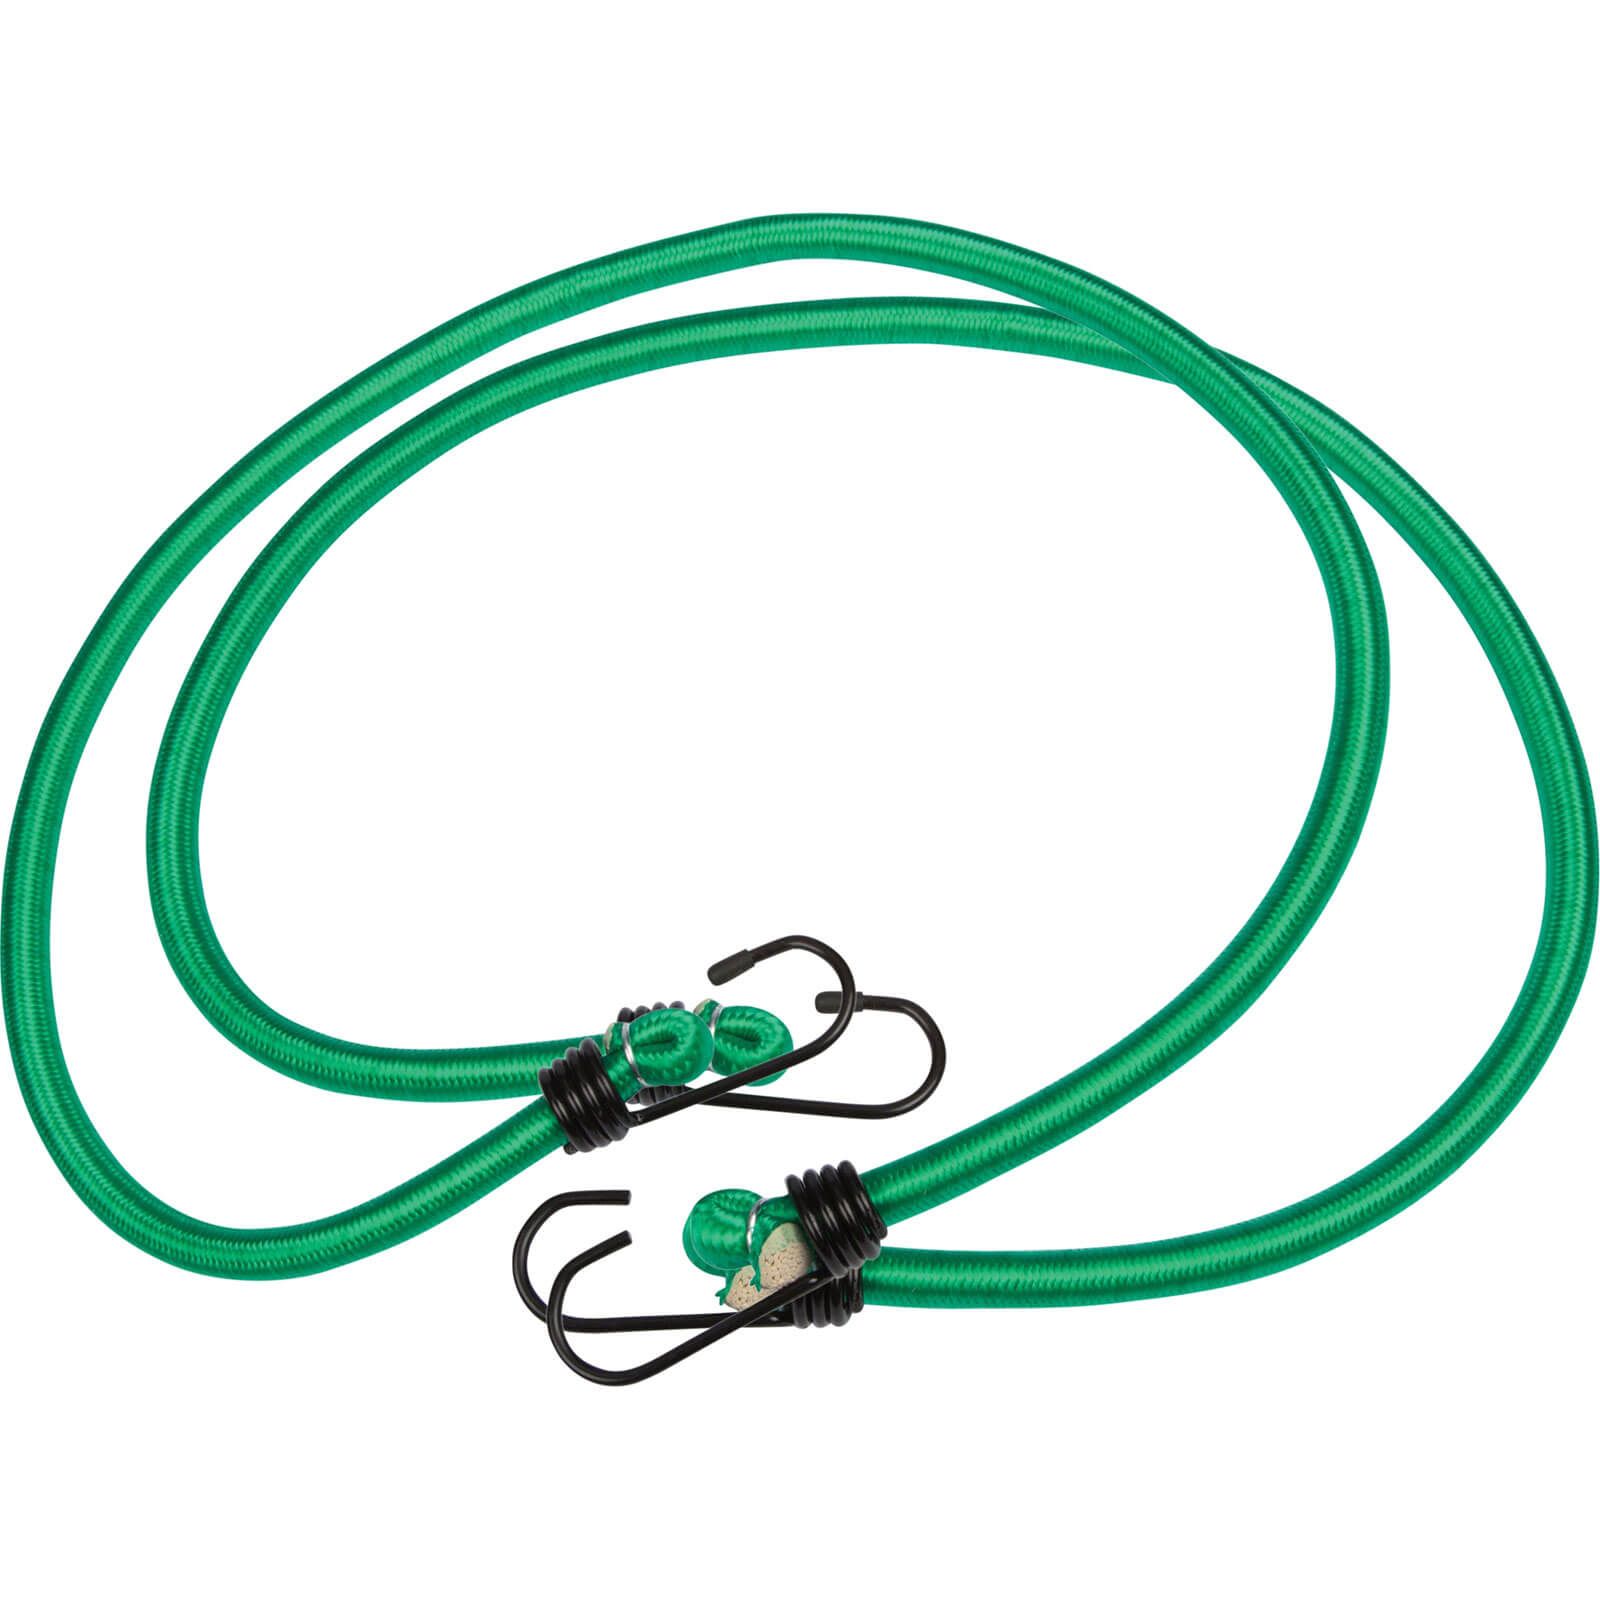 Photo of Bluespot Bungee Cords 900mm Green Pack Of 2